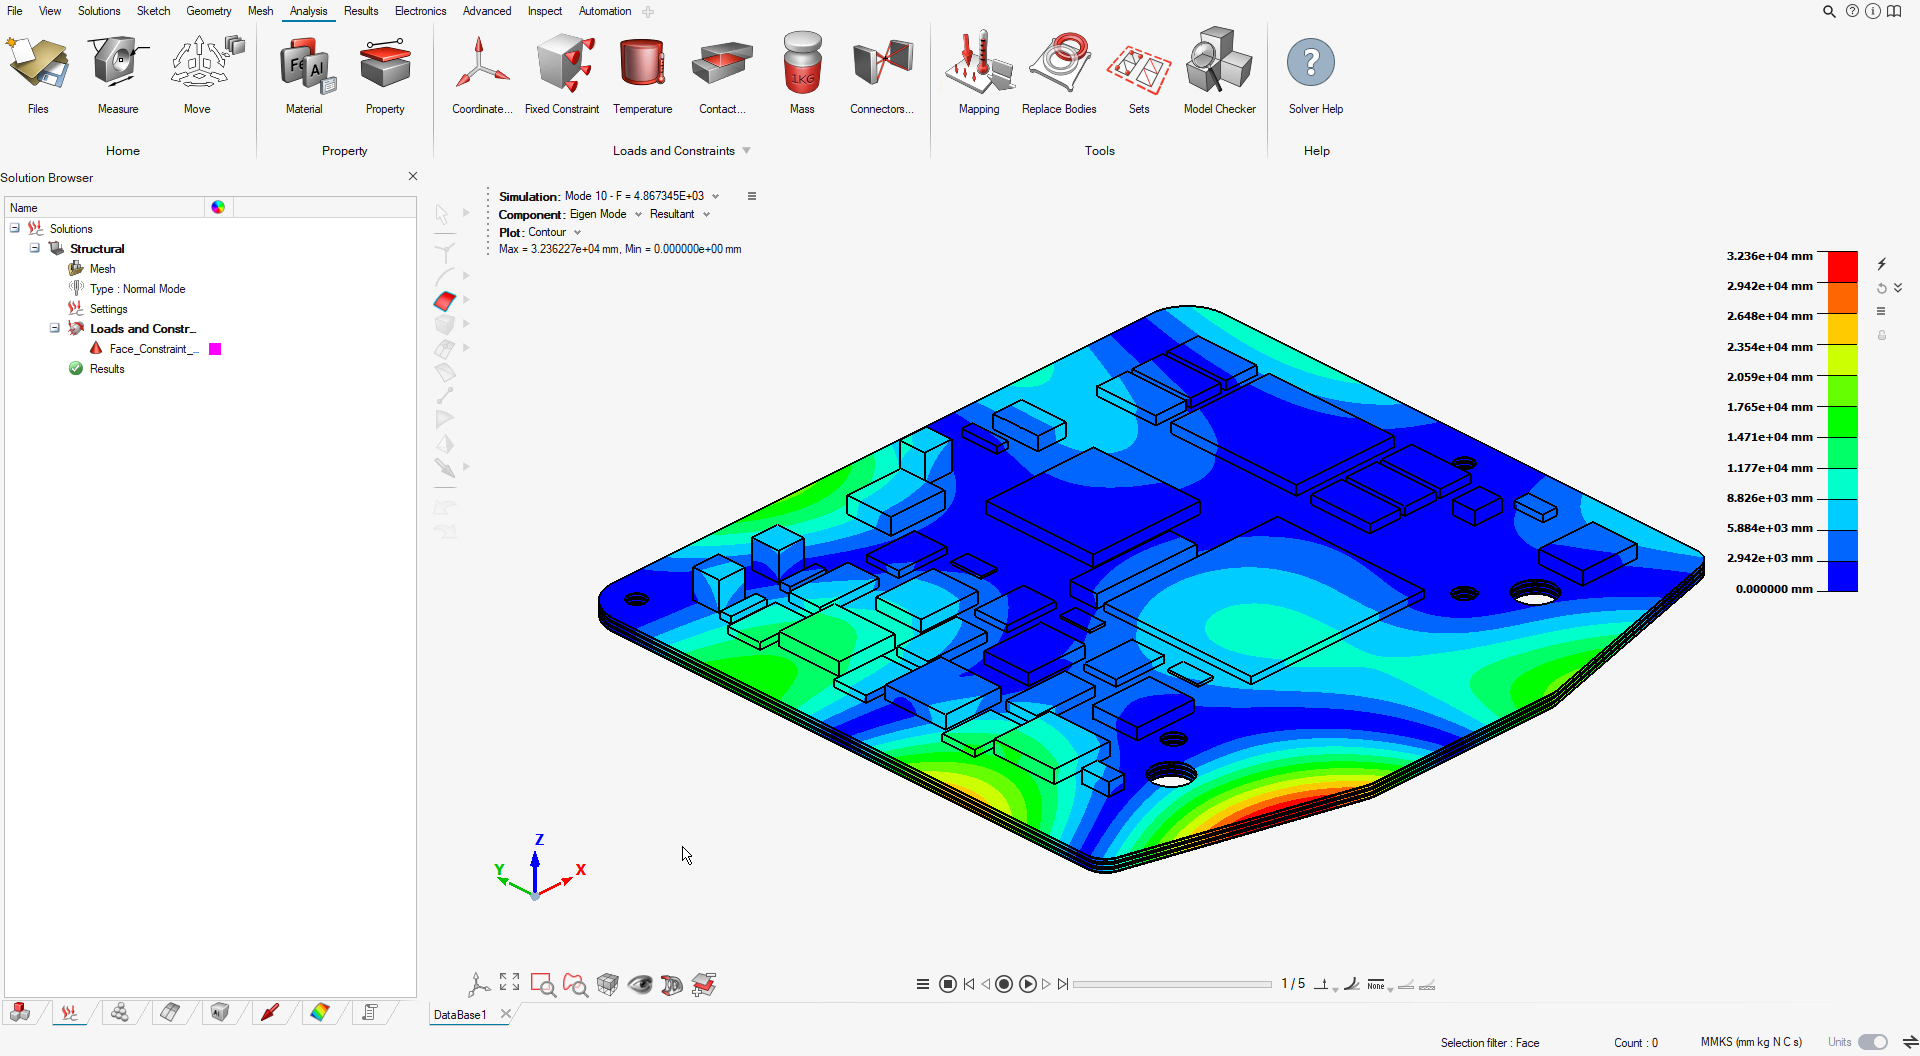 With a direct ODB++ interface for PCB models, Altair SimLab connects the ECAD world to 3D structural and thermal simulation.